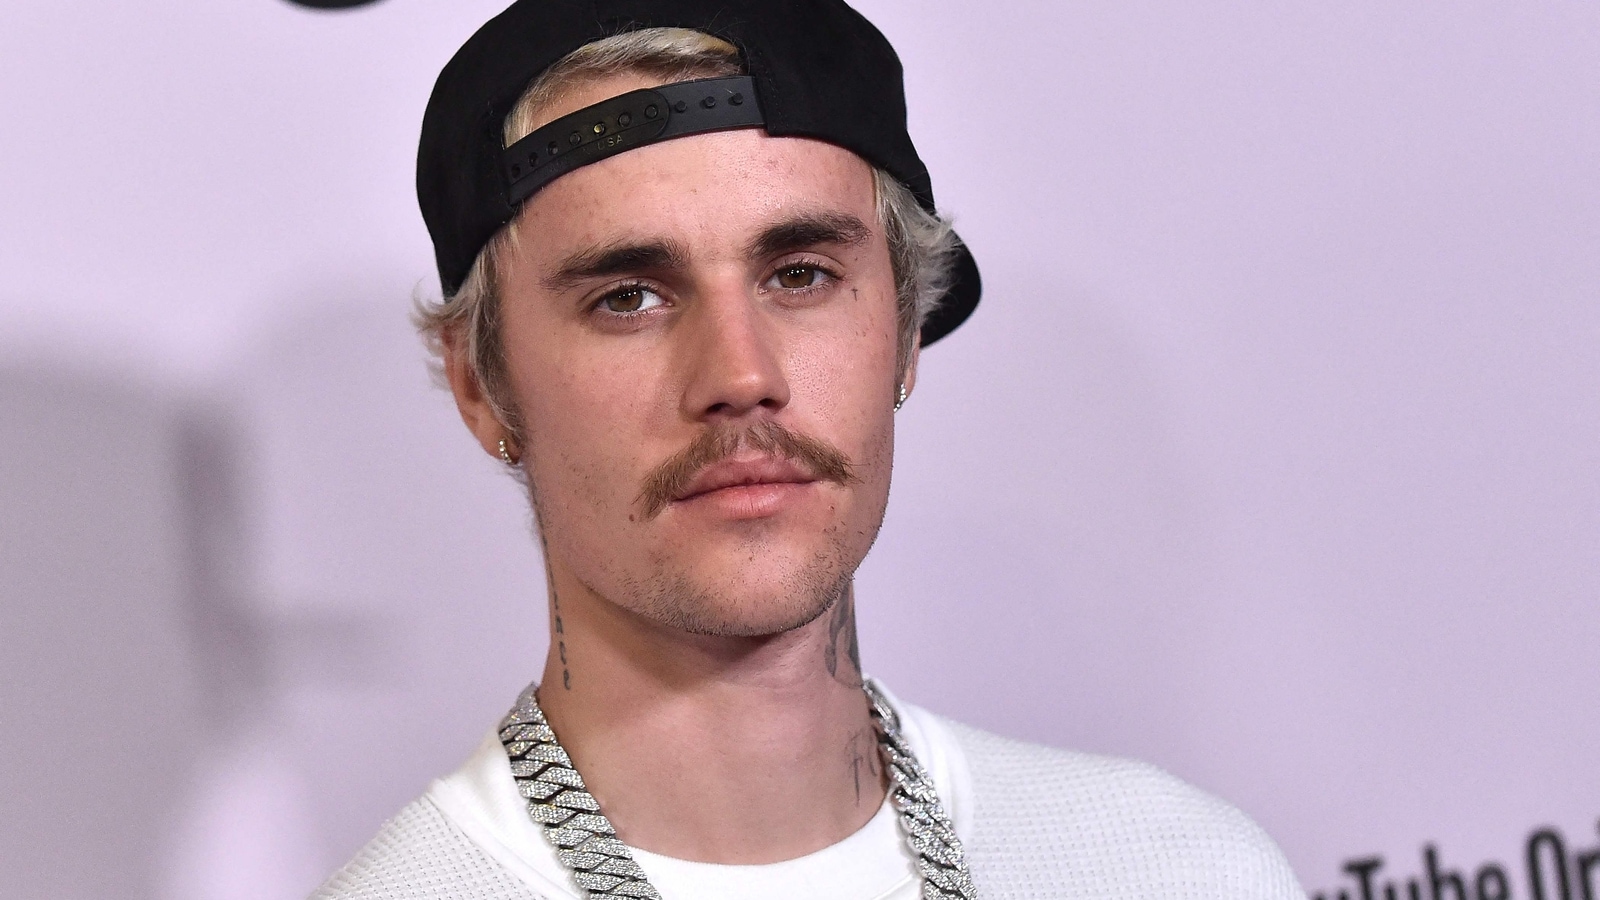 Justin Bieber diagnosed with Ramsay Hunt syndrome: Symptoms, recovery time and more